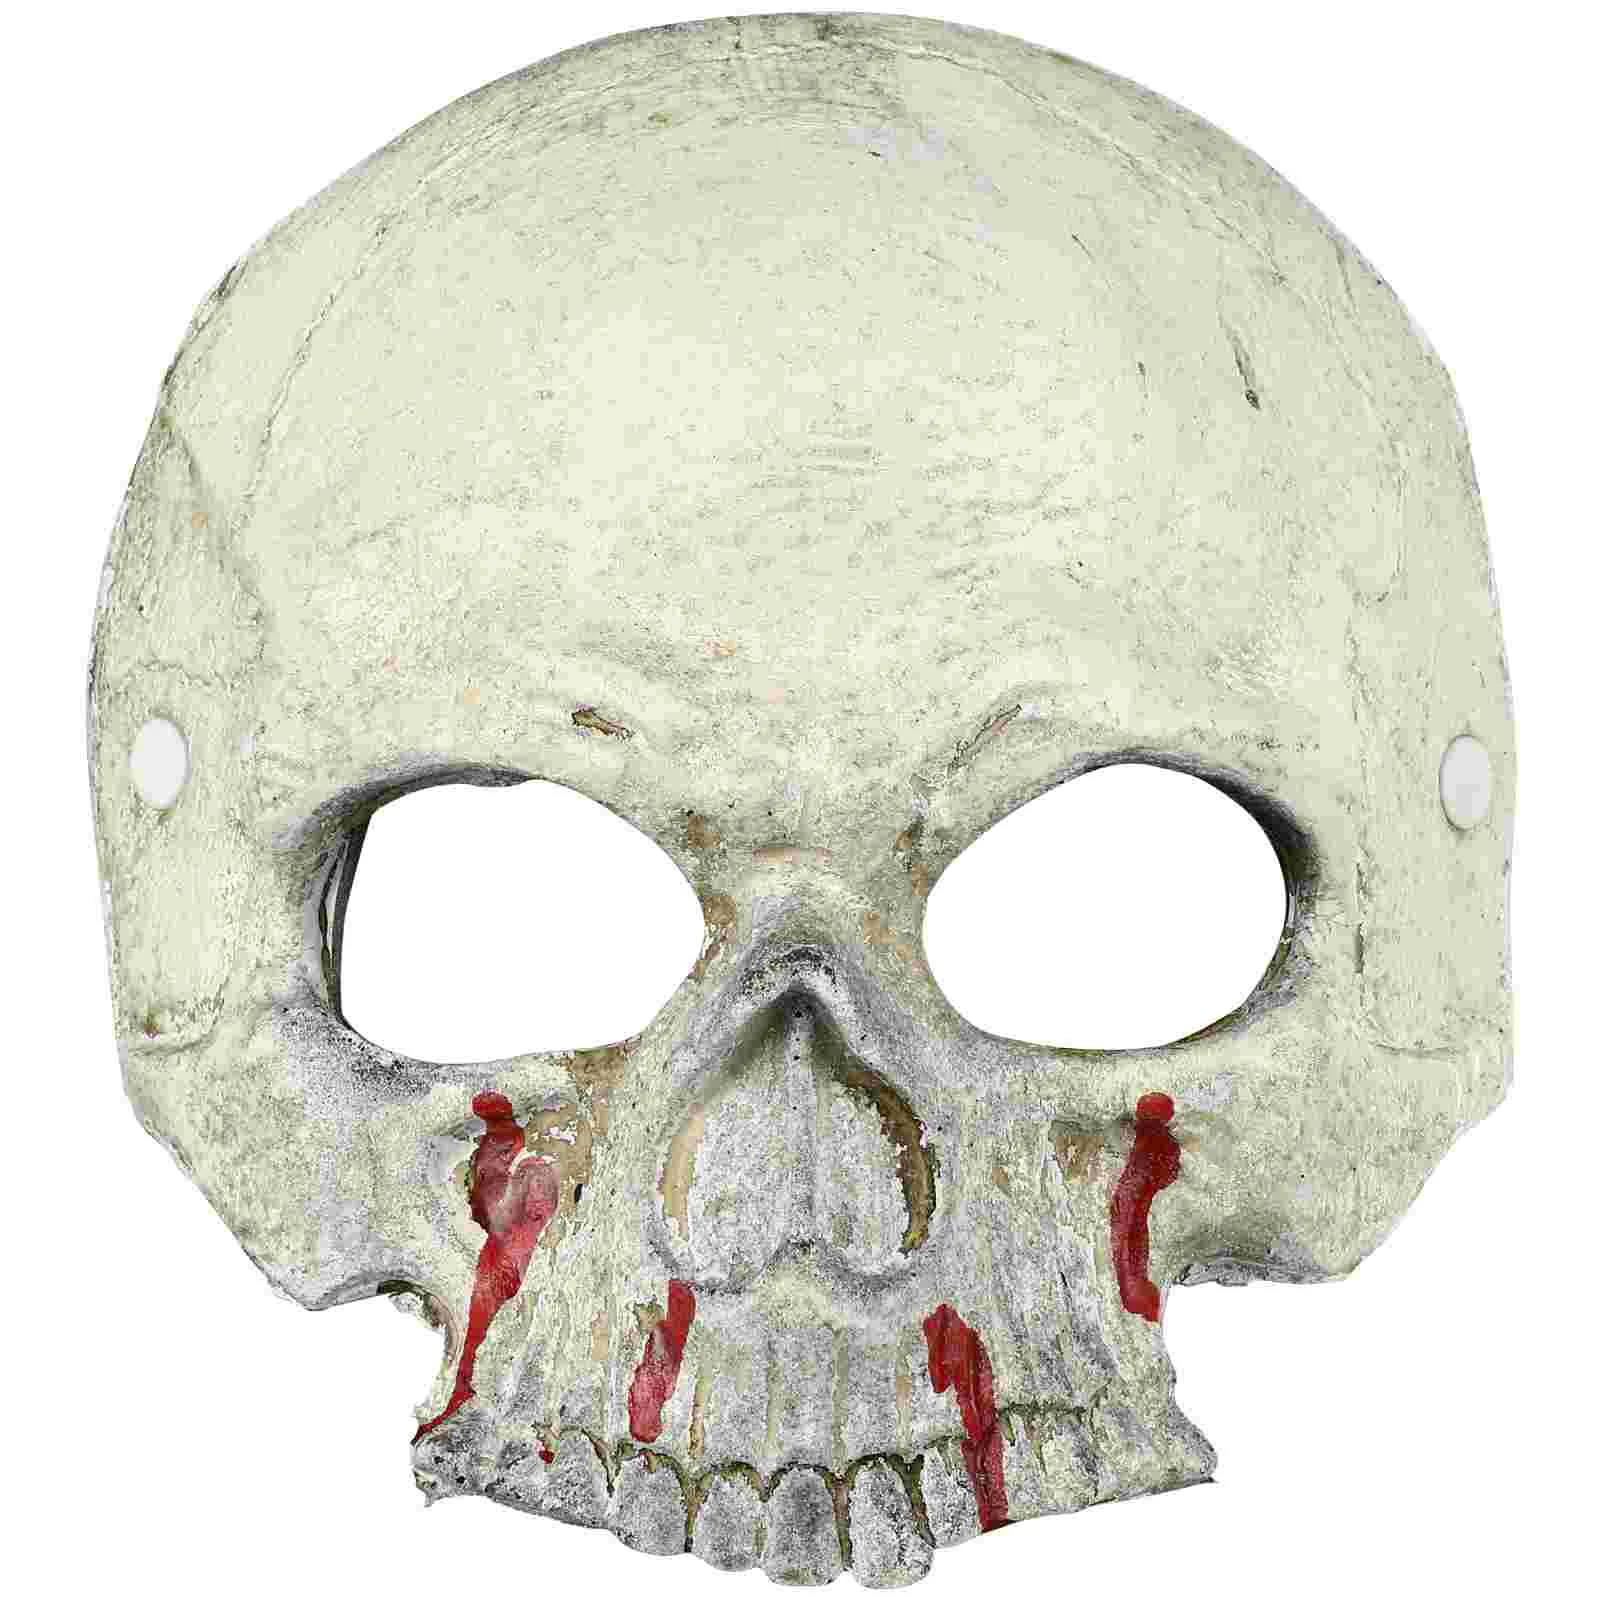 

Halloween Scary Masks Half Skeleton Face Blood Head Cover Realistic Evil Skull Cosplay Halloween Costume Accessory Spooky